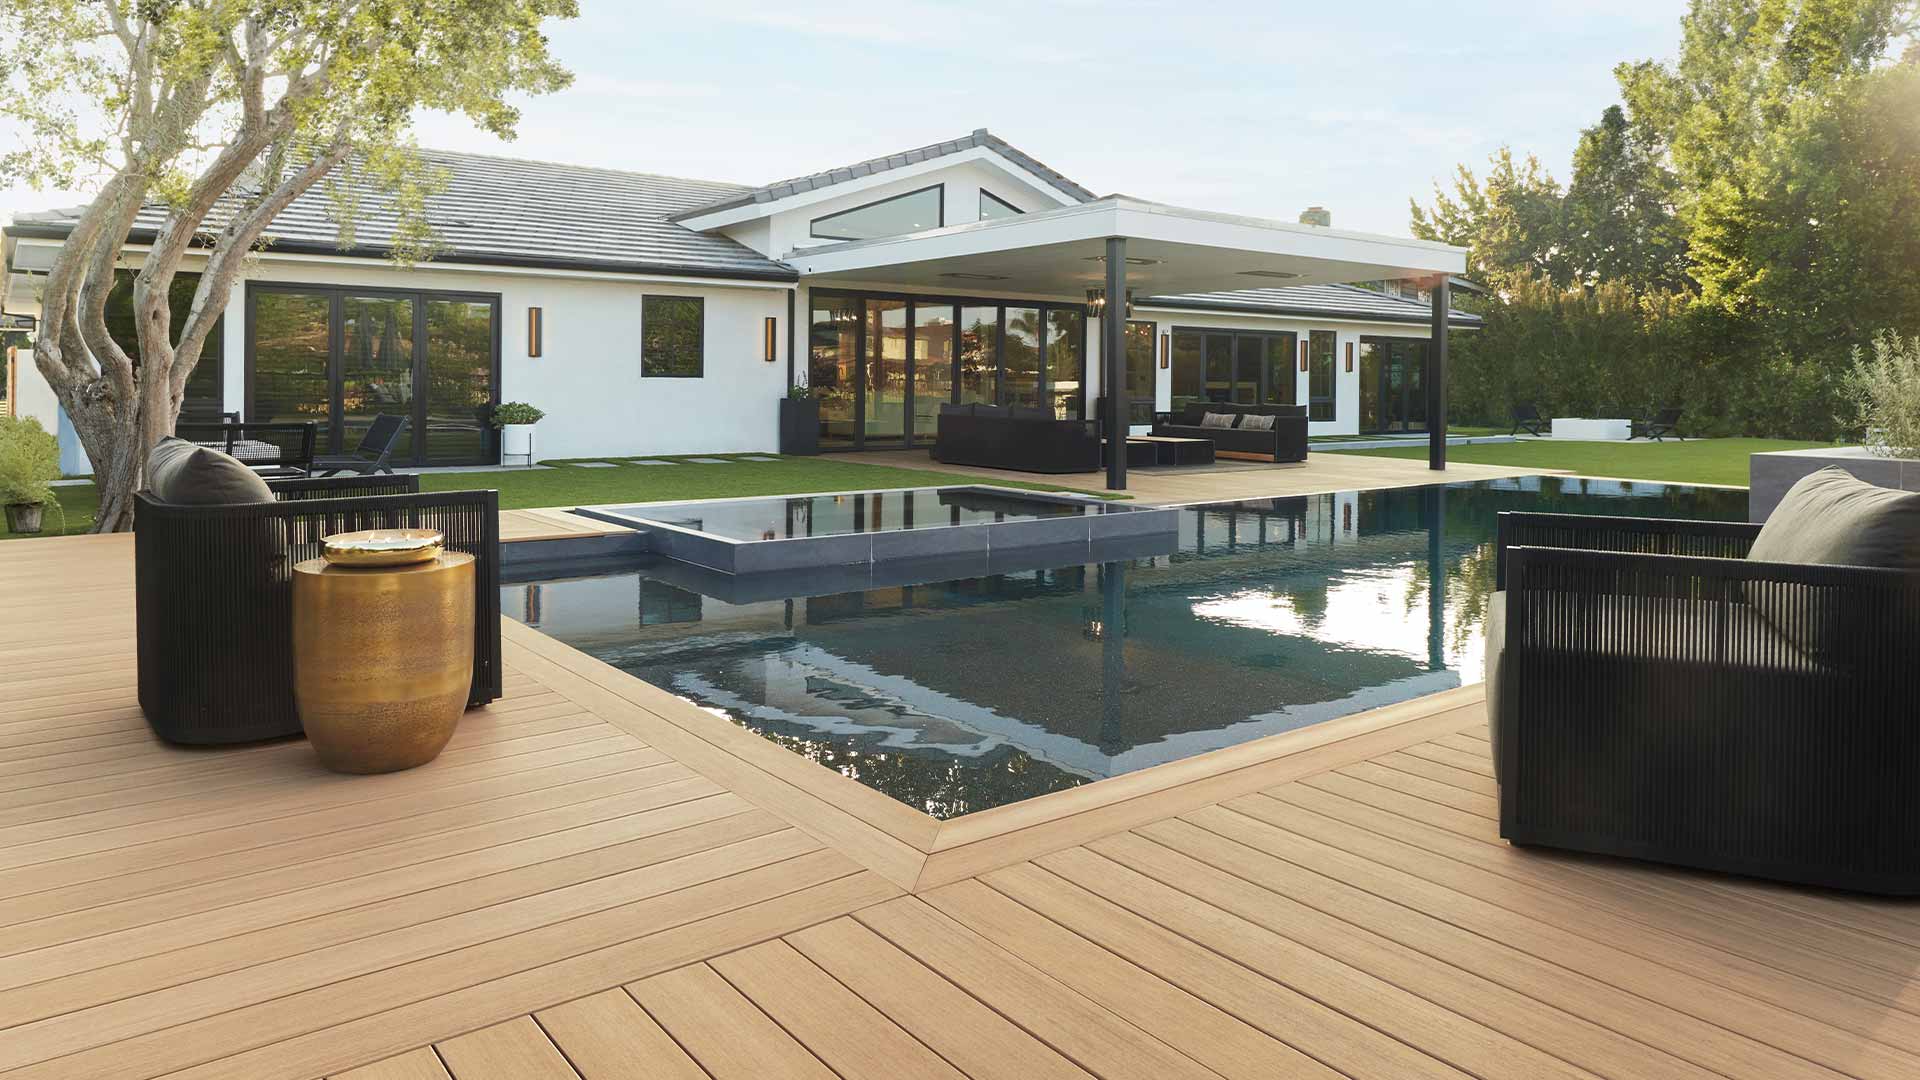 Sunken pool in backyard of house with light brown deck